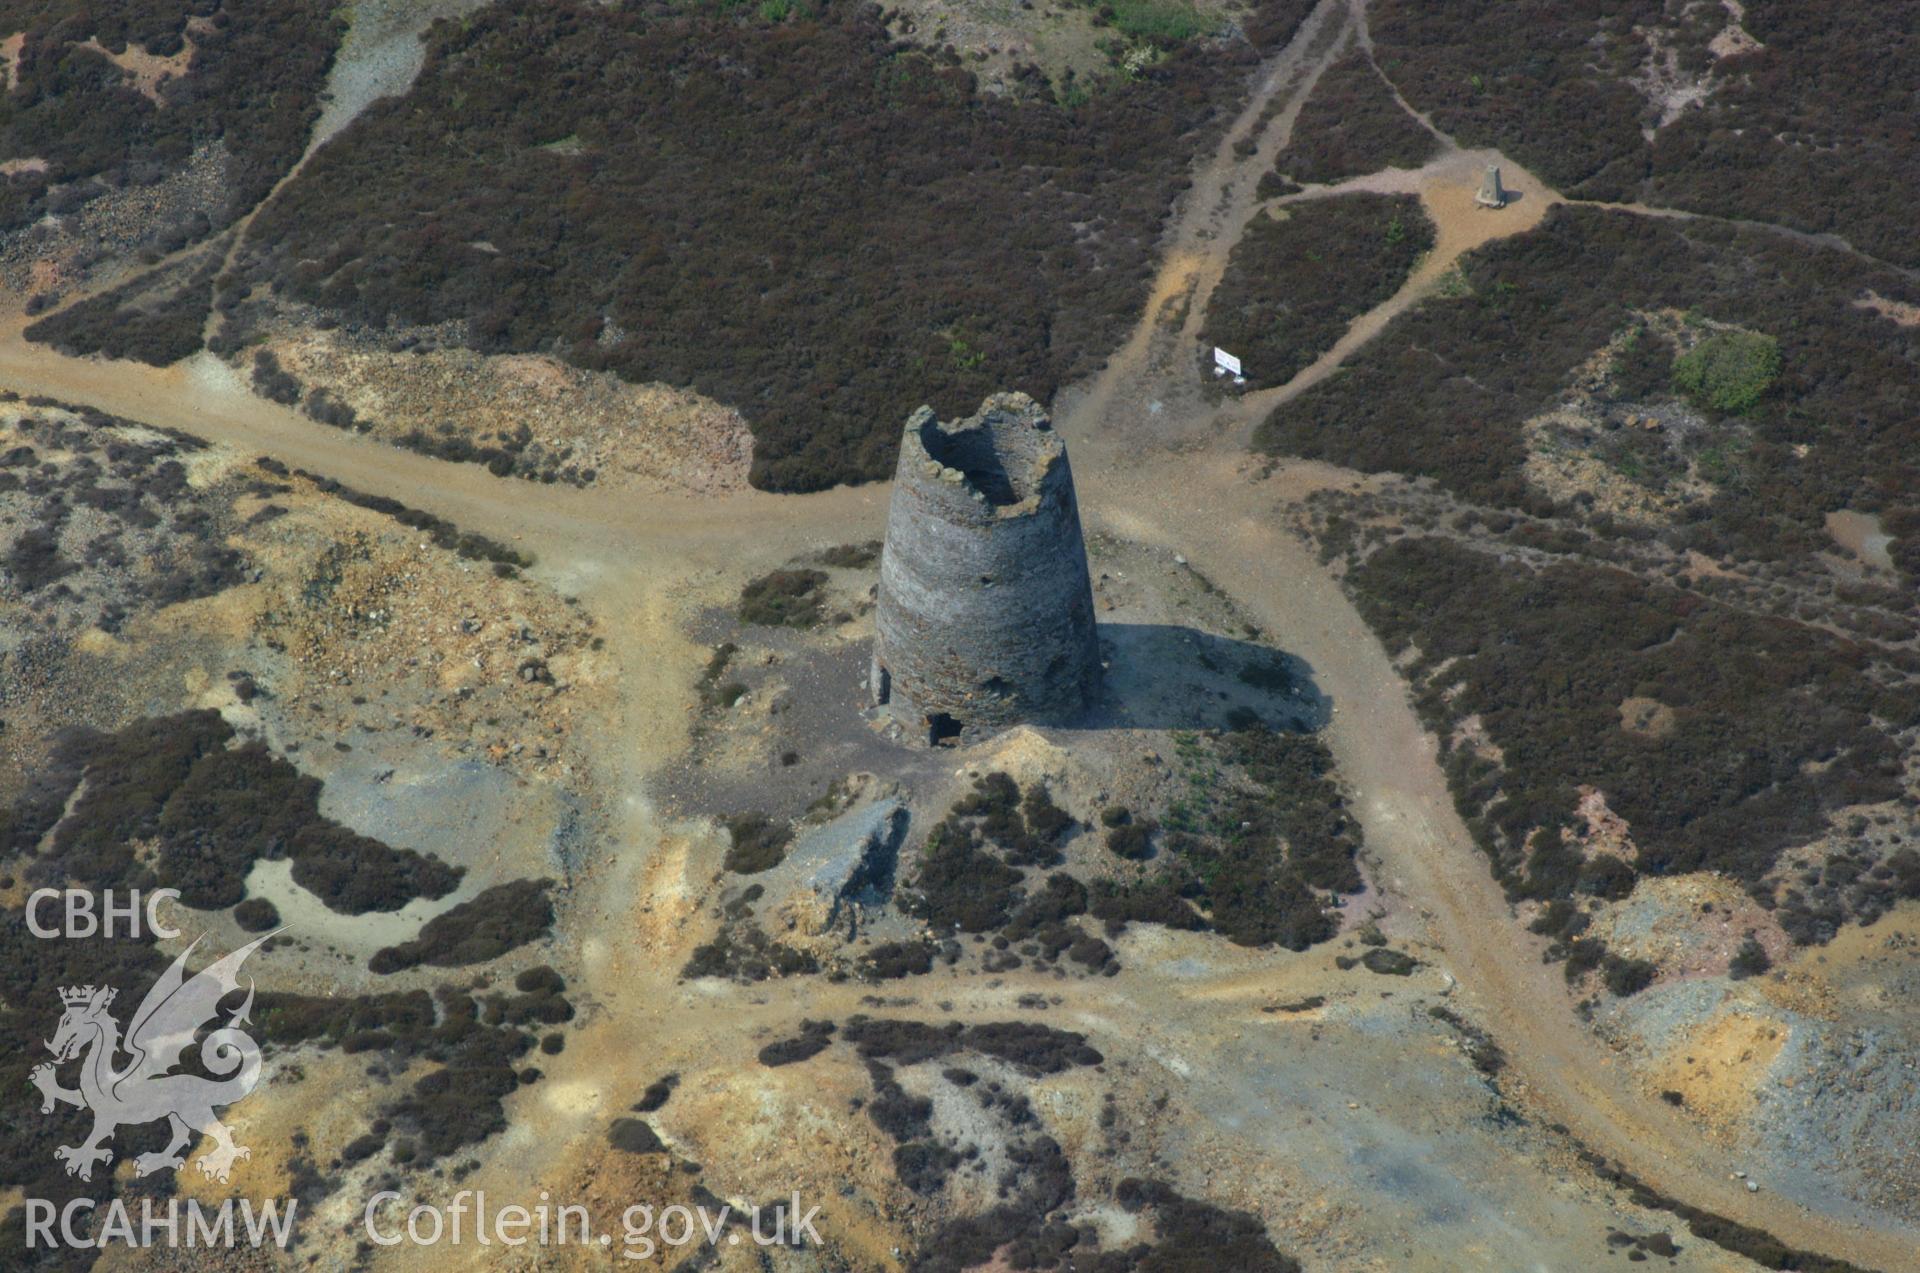 RCAHMW colour oblique aerial photograph of Parys Mountain Pumping Windmill taken on 26/05/2004 by Toby Driver